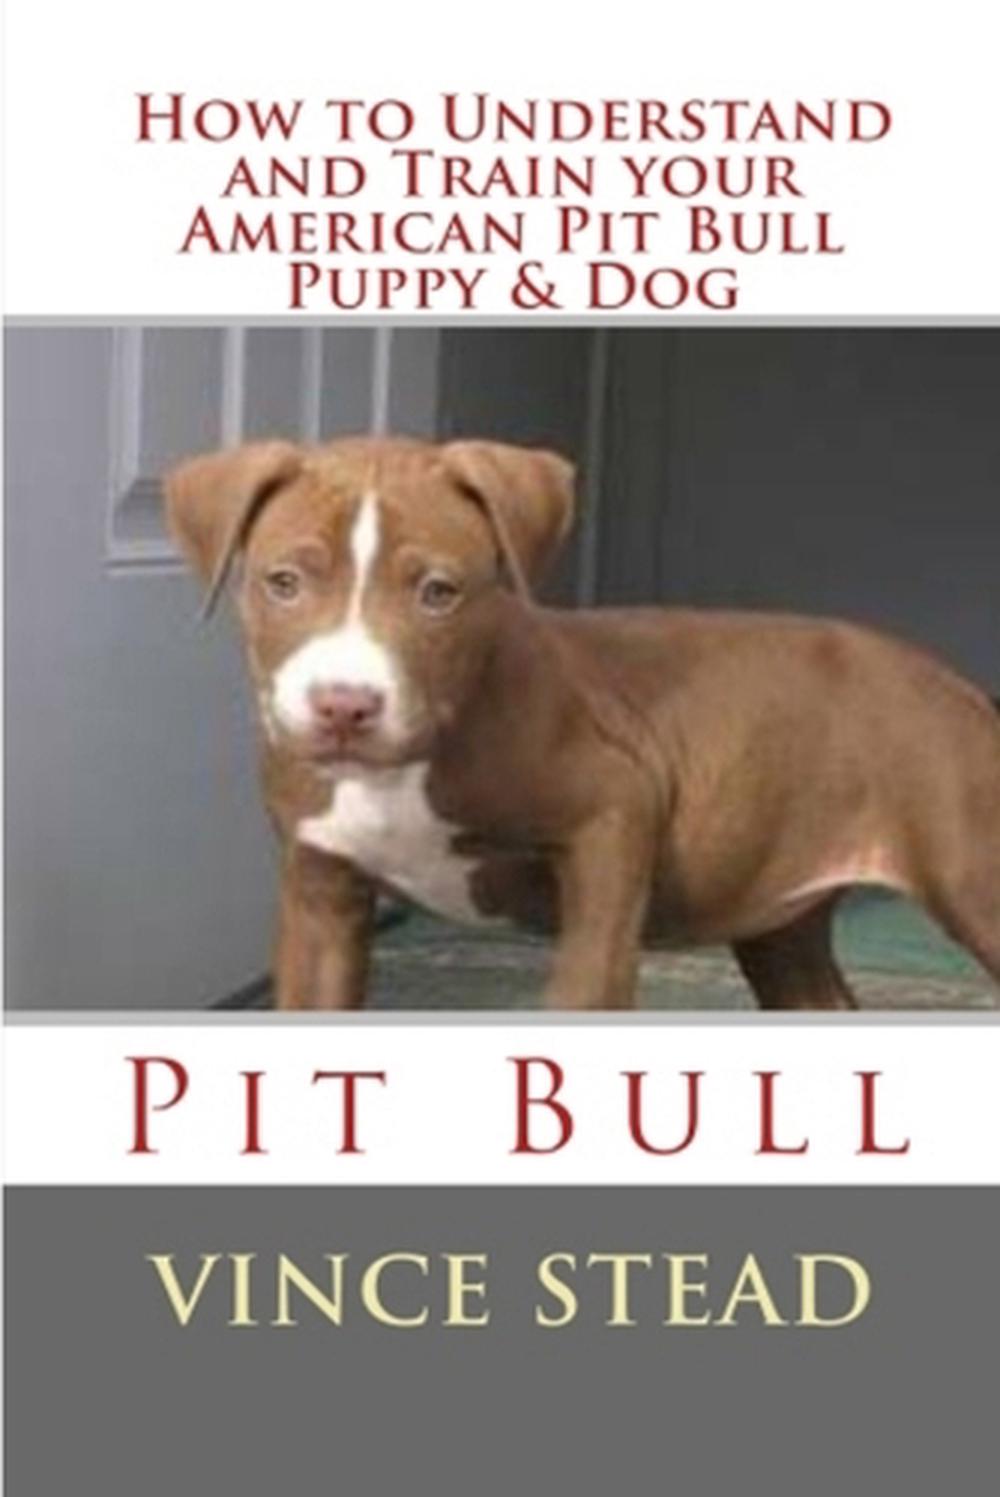 How to Understand and Train Your American Pit Bull Puppy